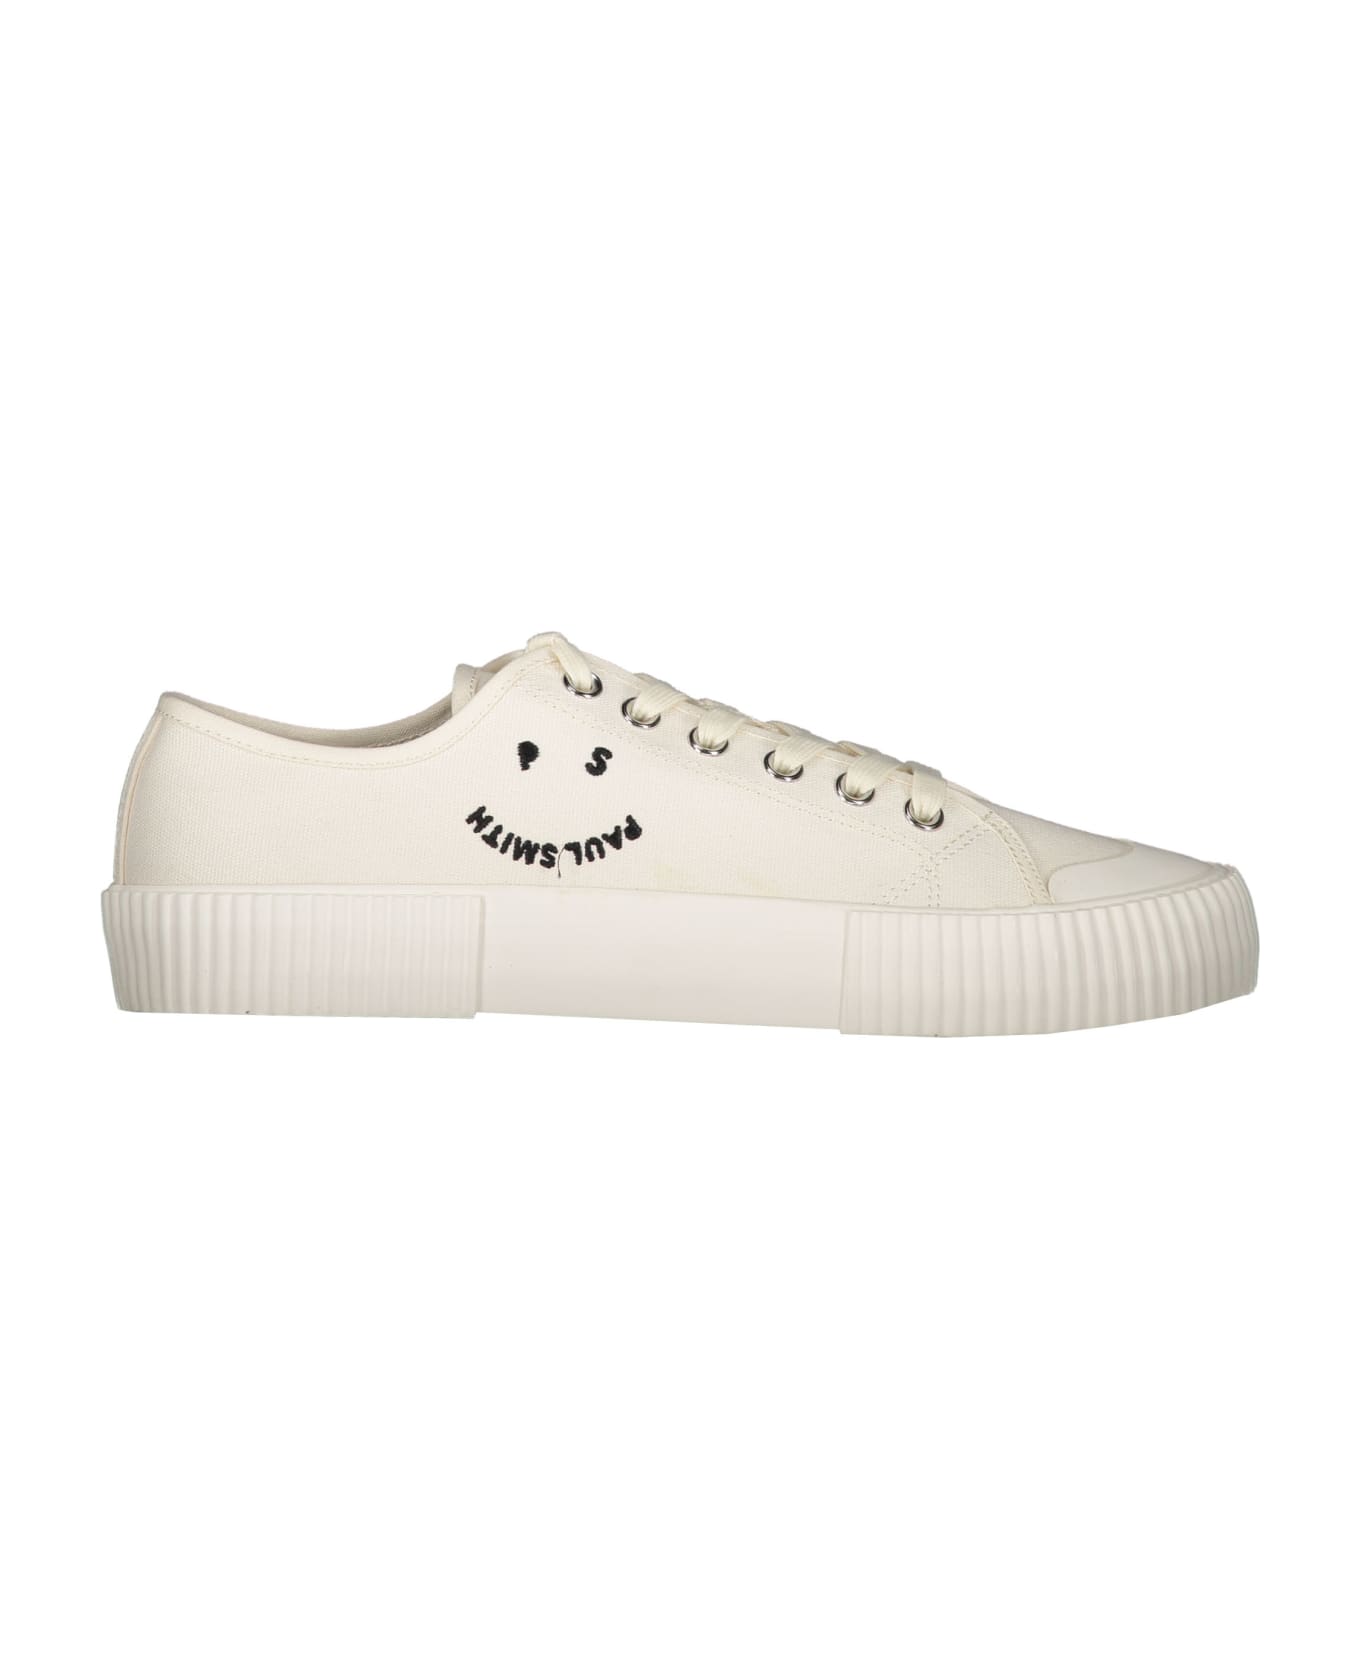 Paul Smith Canvas Low-top Sneakers - White スニーカー